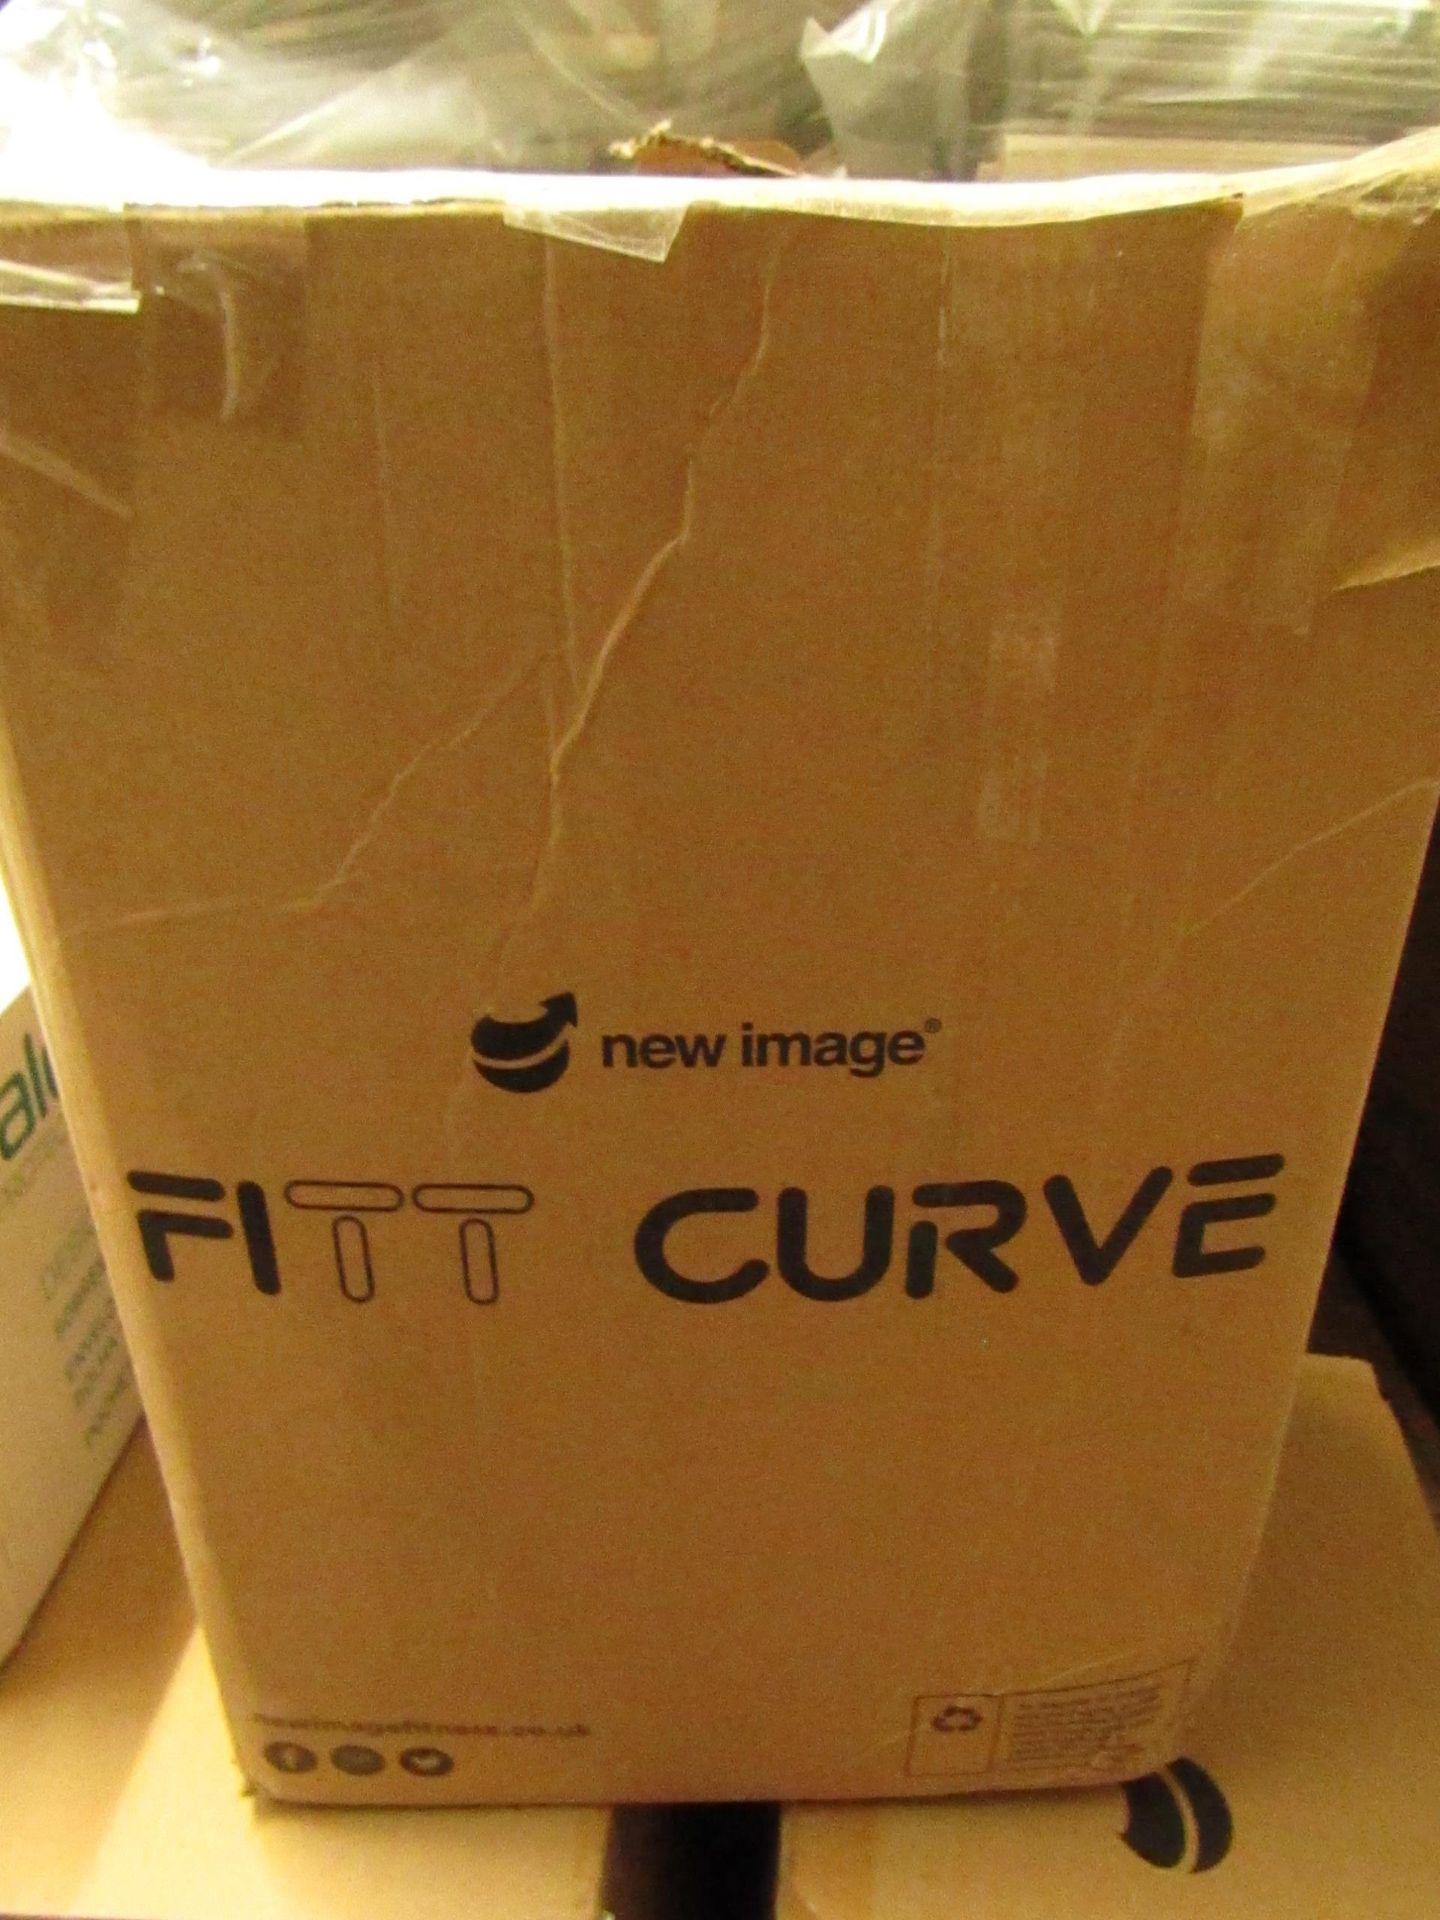 |1x | NEW IMAGE FITT CURVE | NO ONLINE RESALE | UNCHECKED & BOXED | SKU 5060784670047 | RRP £39.